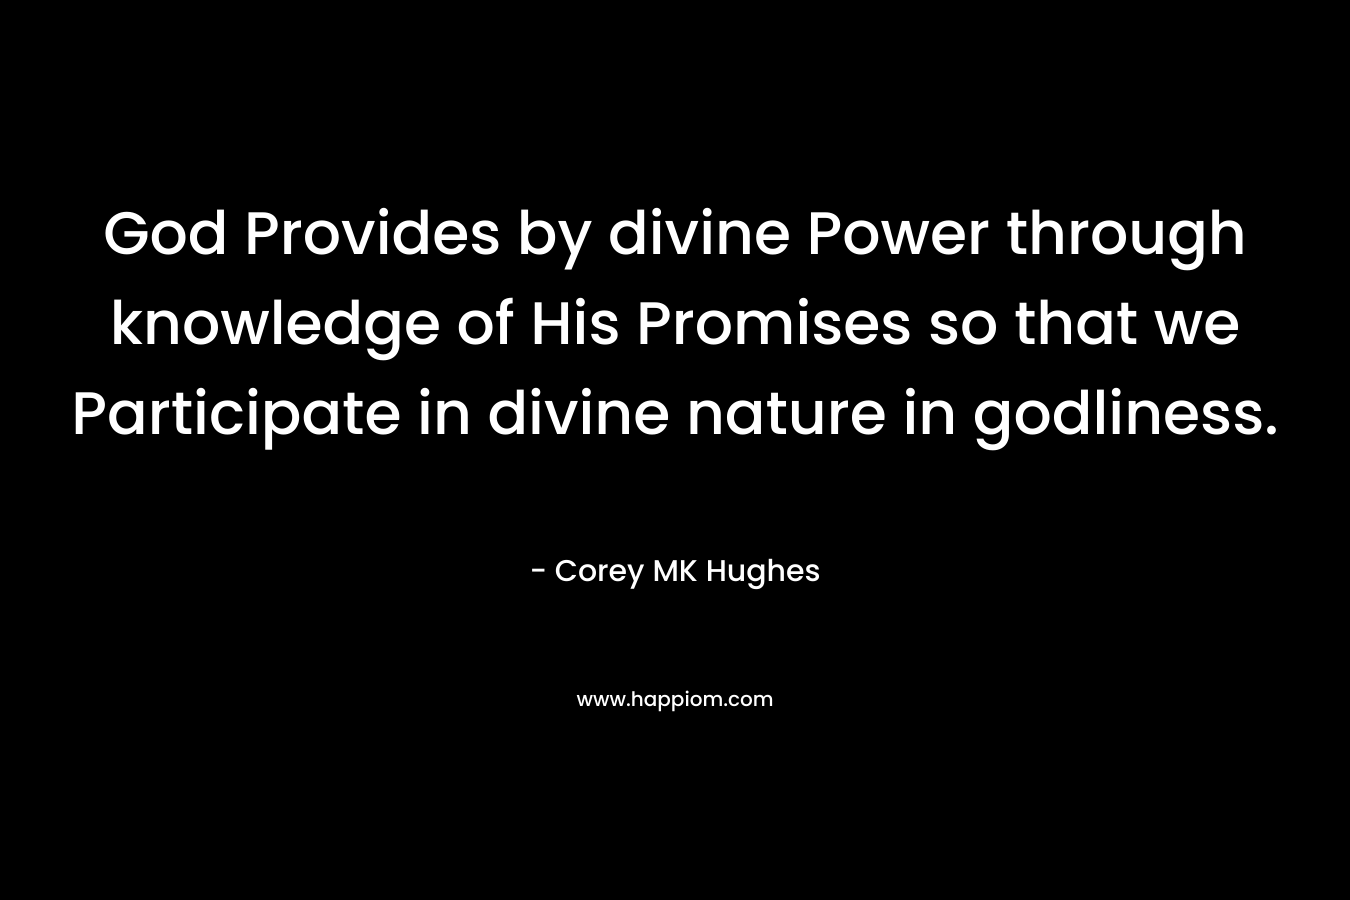 God Provides by divine Power through knowledge of His Promises so that we Participate in divine nature in godliness. – Corey MK Hughes